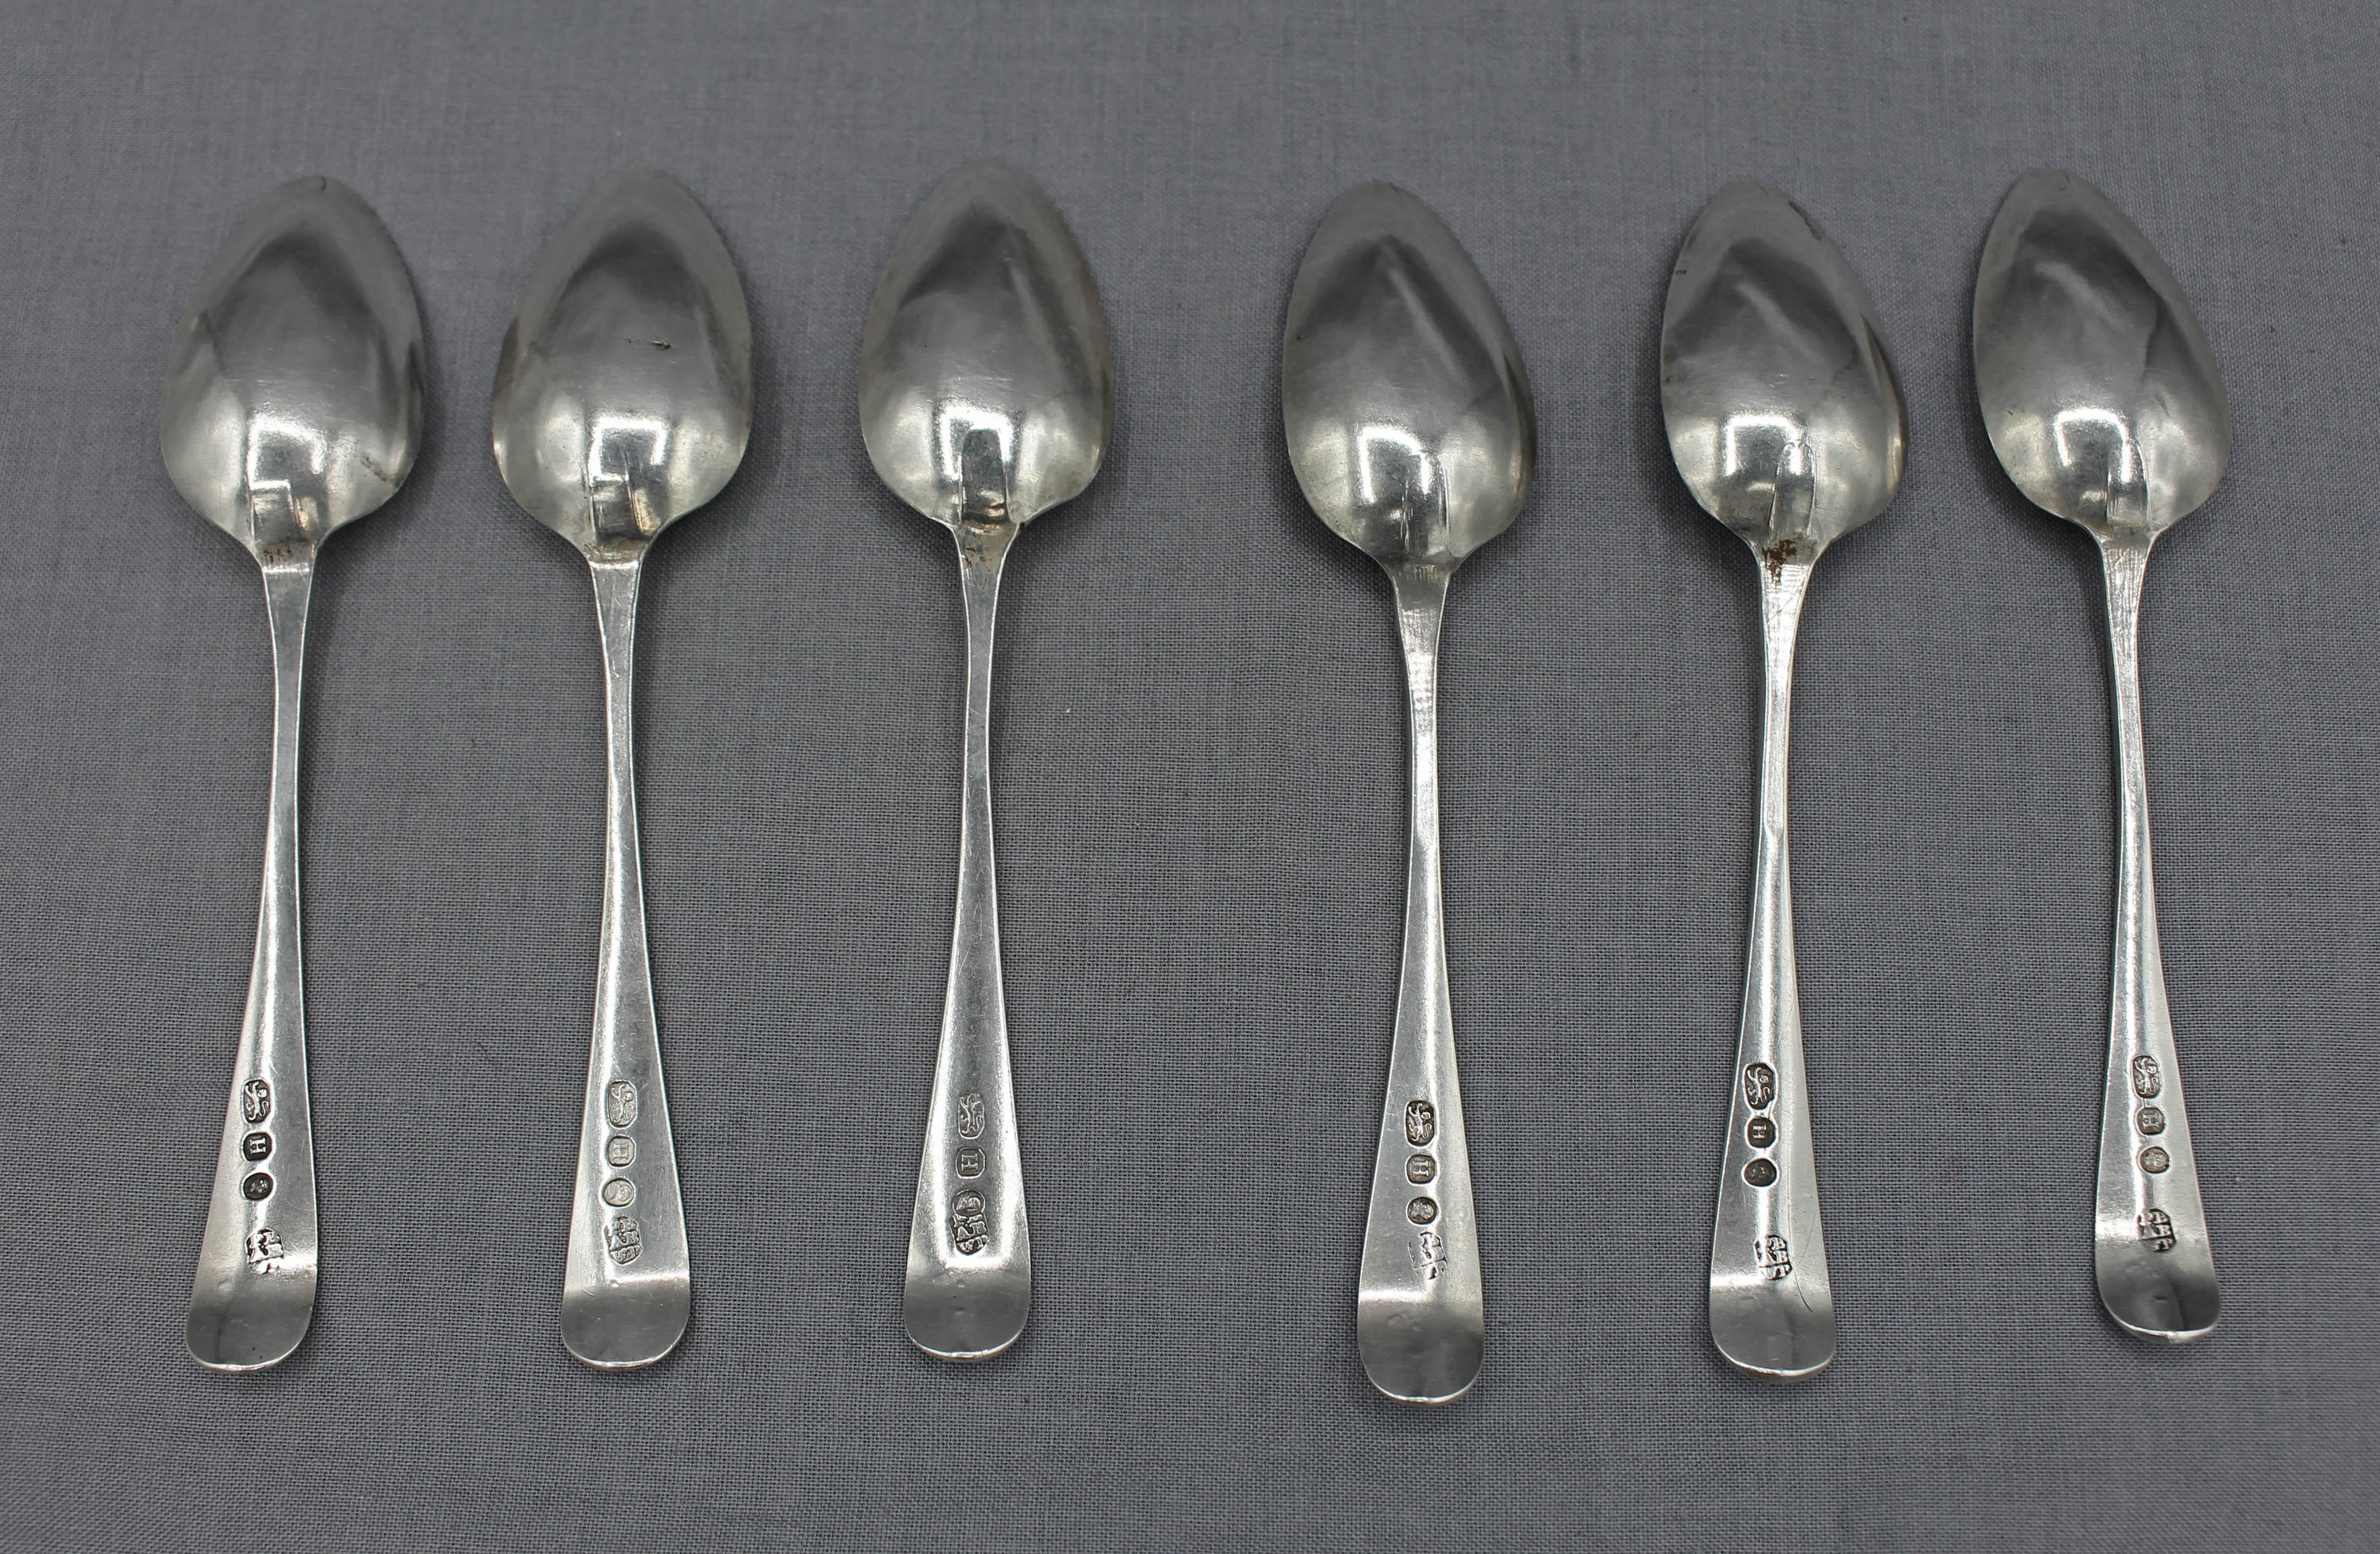 Set of 6 sterling silver coffee spoons by Peter, Ann & William Bateman, London, 1803. Son, daughter-in-law & grandson of Hester Bateman. The firm lasted from 1800 to 1805. Monogram with engraved drops 